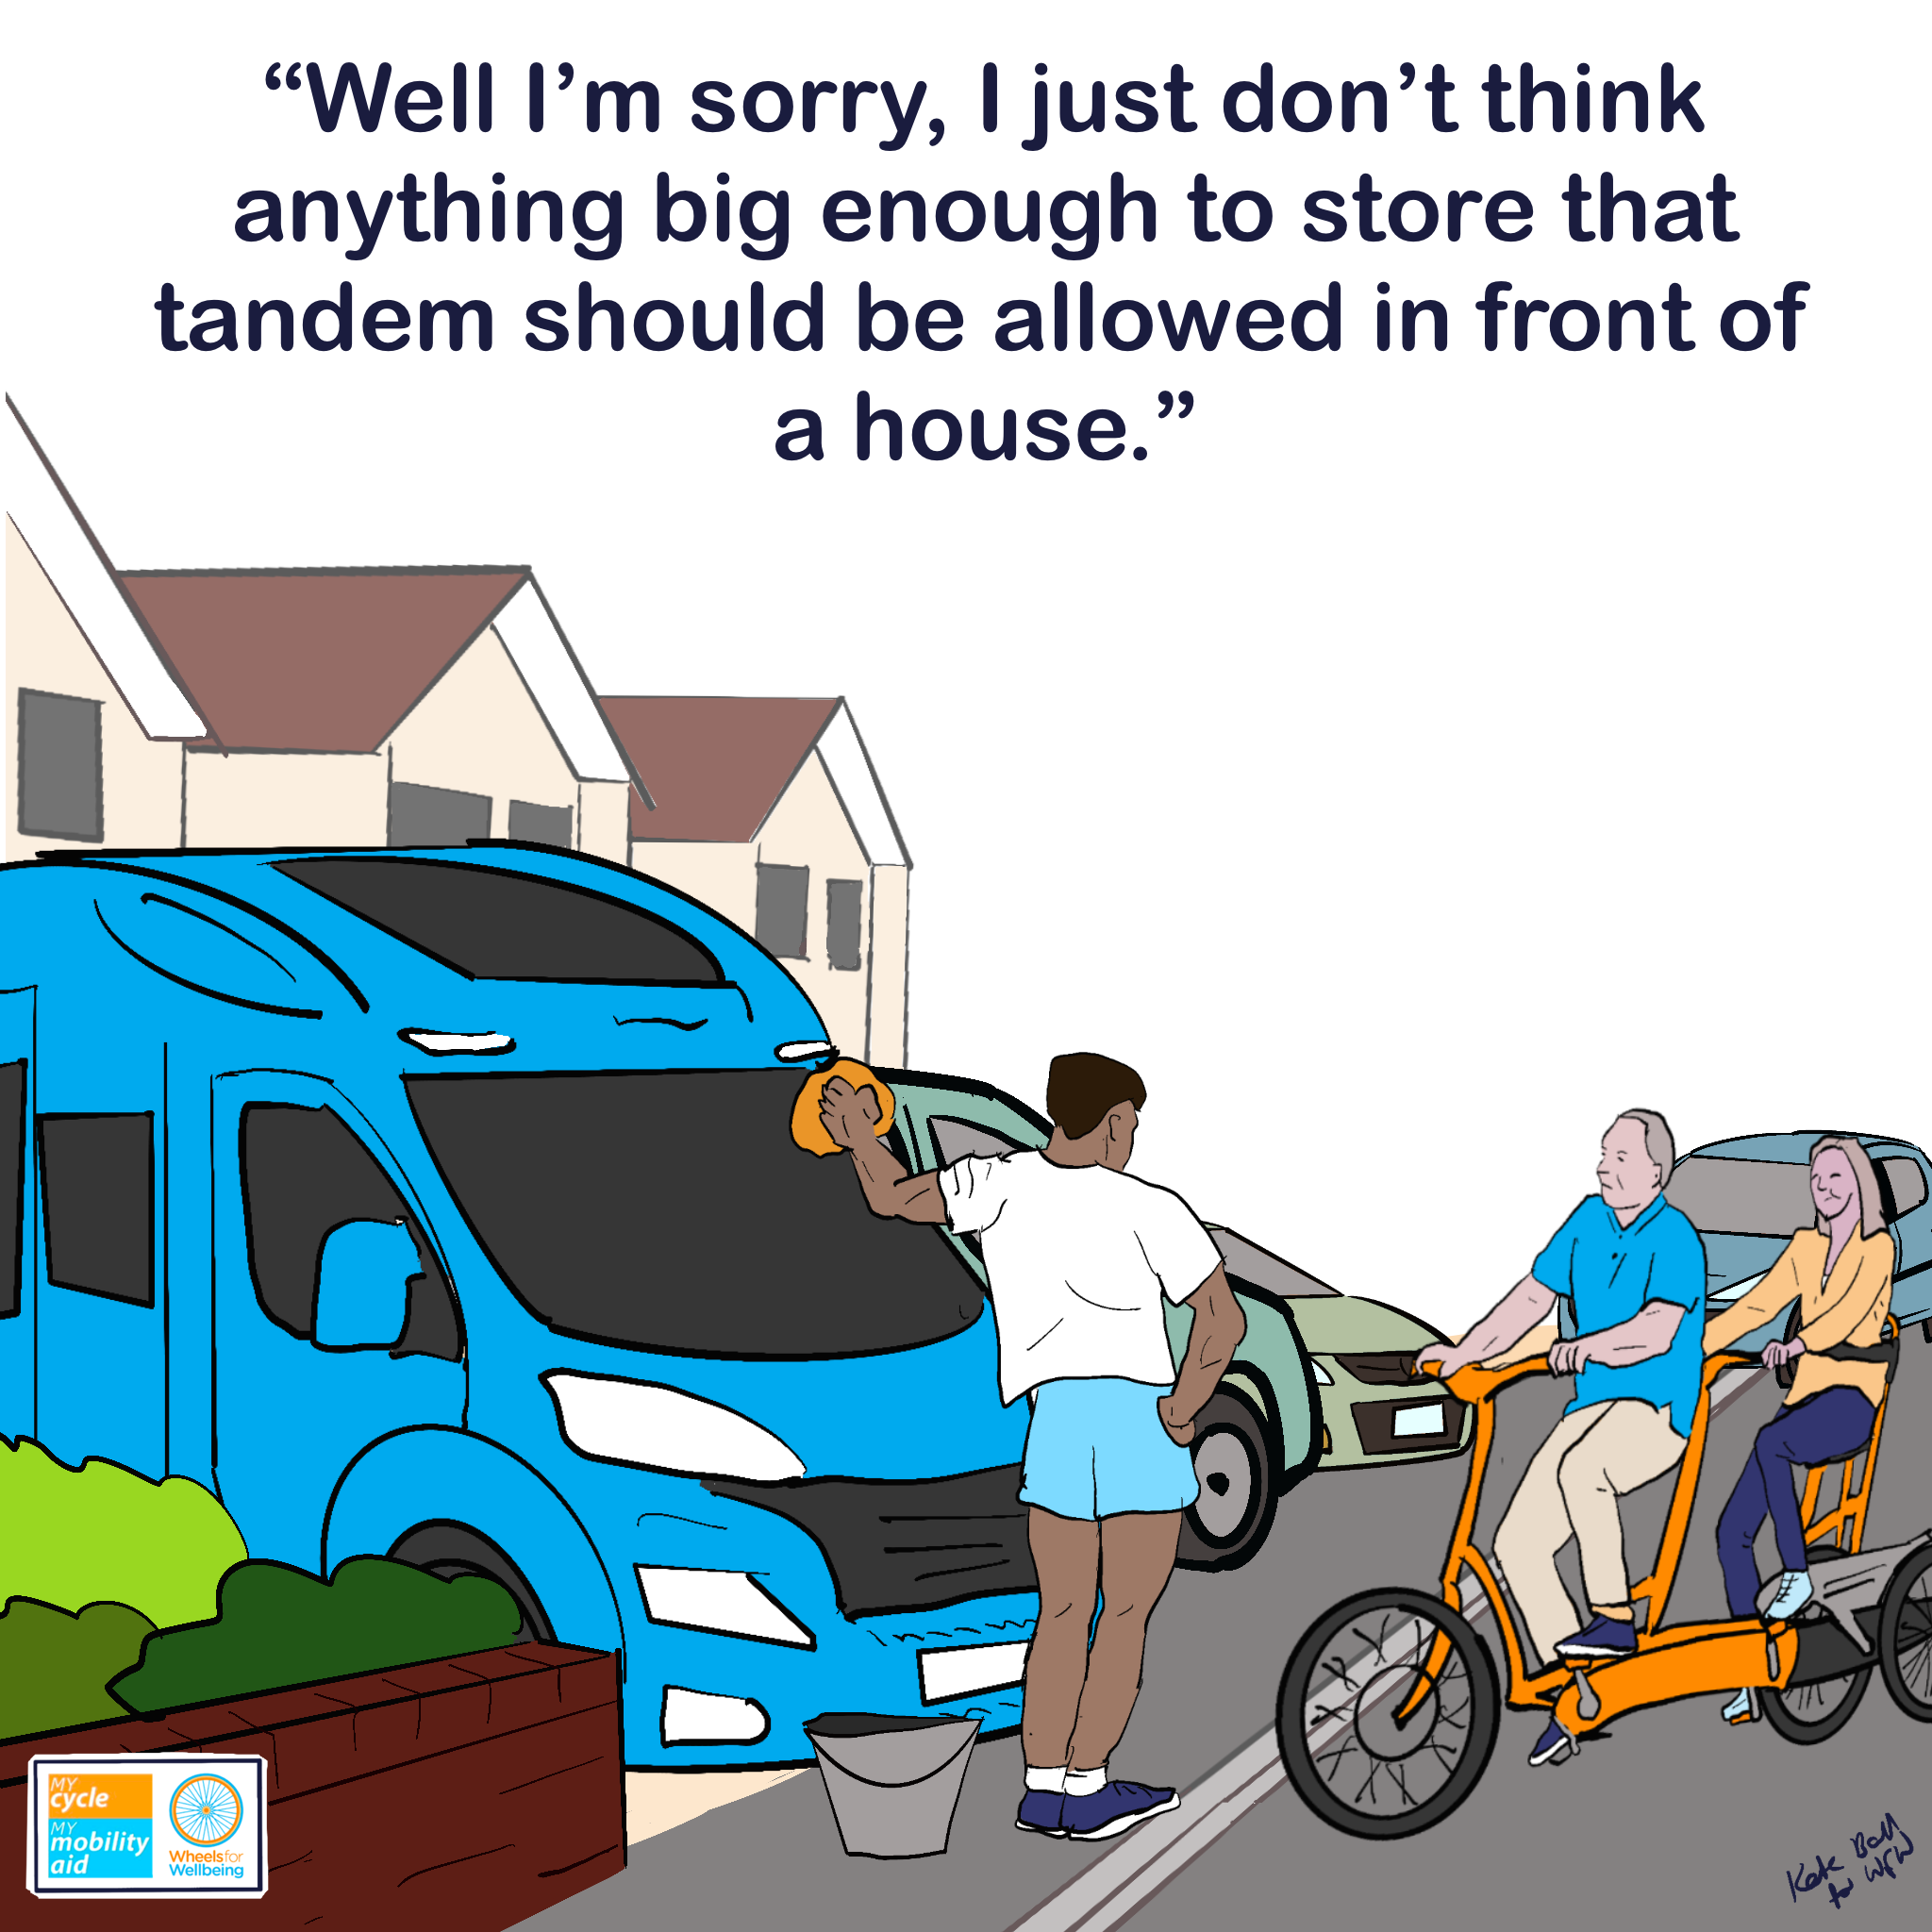 Graphic shows a row of houses and a man washing a motorhome on a driveway, with further vehicles of various sizes parked in more driveways and on the pavement down the road. A couple riding a tandem tricycle are talking to the man, who has a hand on hip in an assertive pose.
Caption reads “Well I’m sorry, I just don’t think anything big enough to store that tandem should be allowed in front of a house.”
The Wheels for Wellbeing and My Cycle, My Mobility Aid logos are in the bottom left hand corner. A signature Kate Ball for WfW is in the bottom right hand corner.
